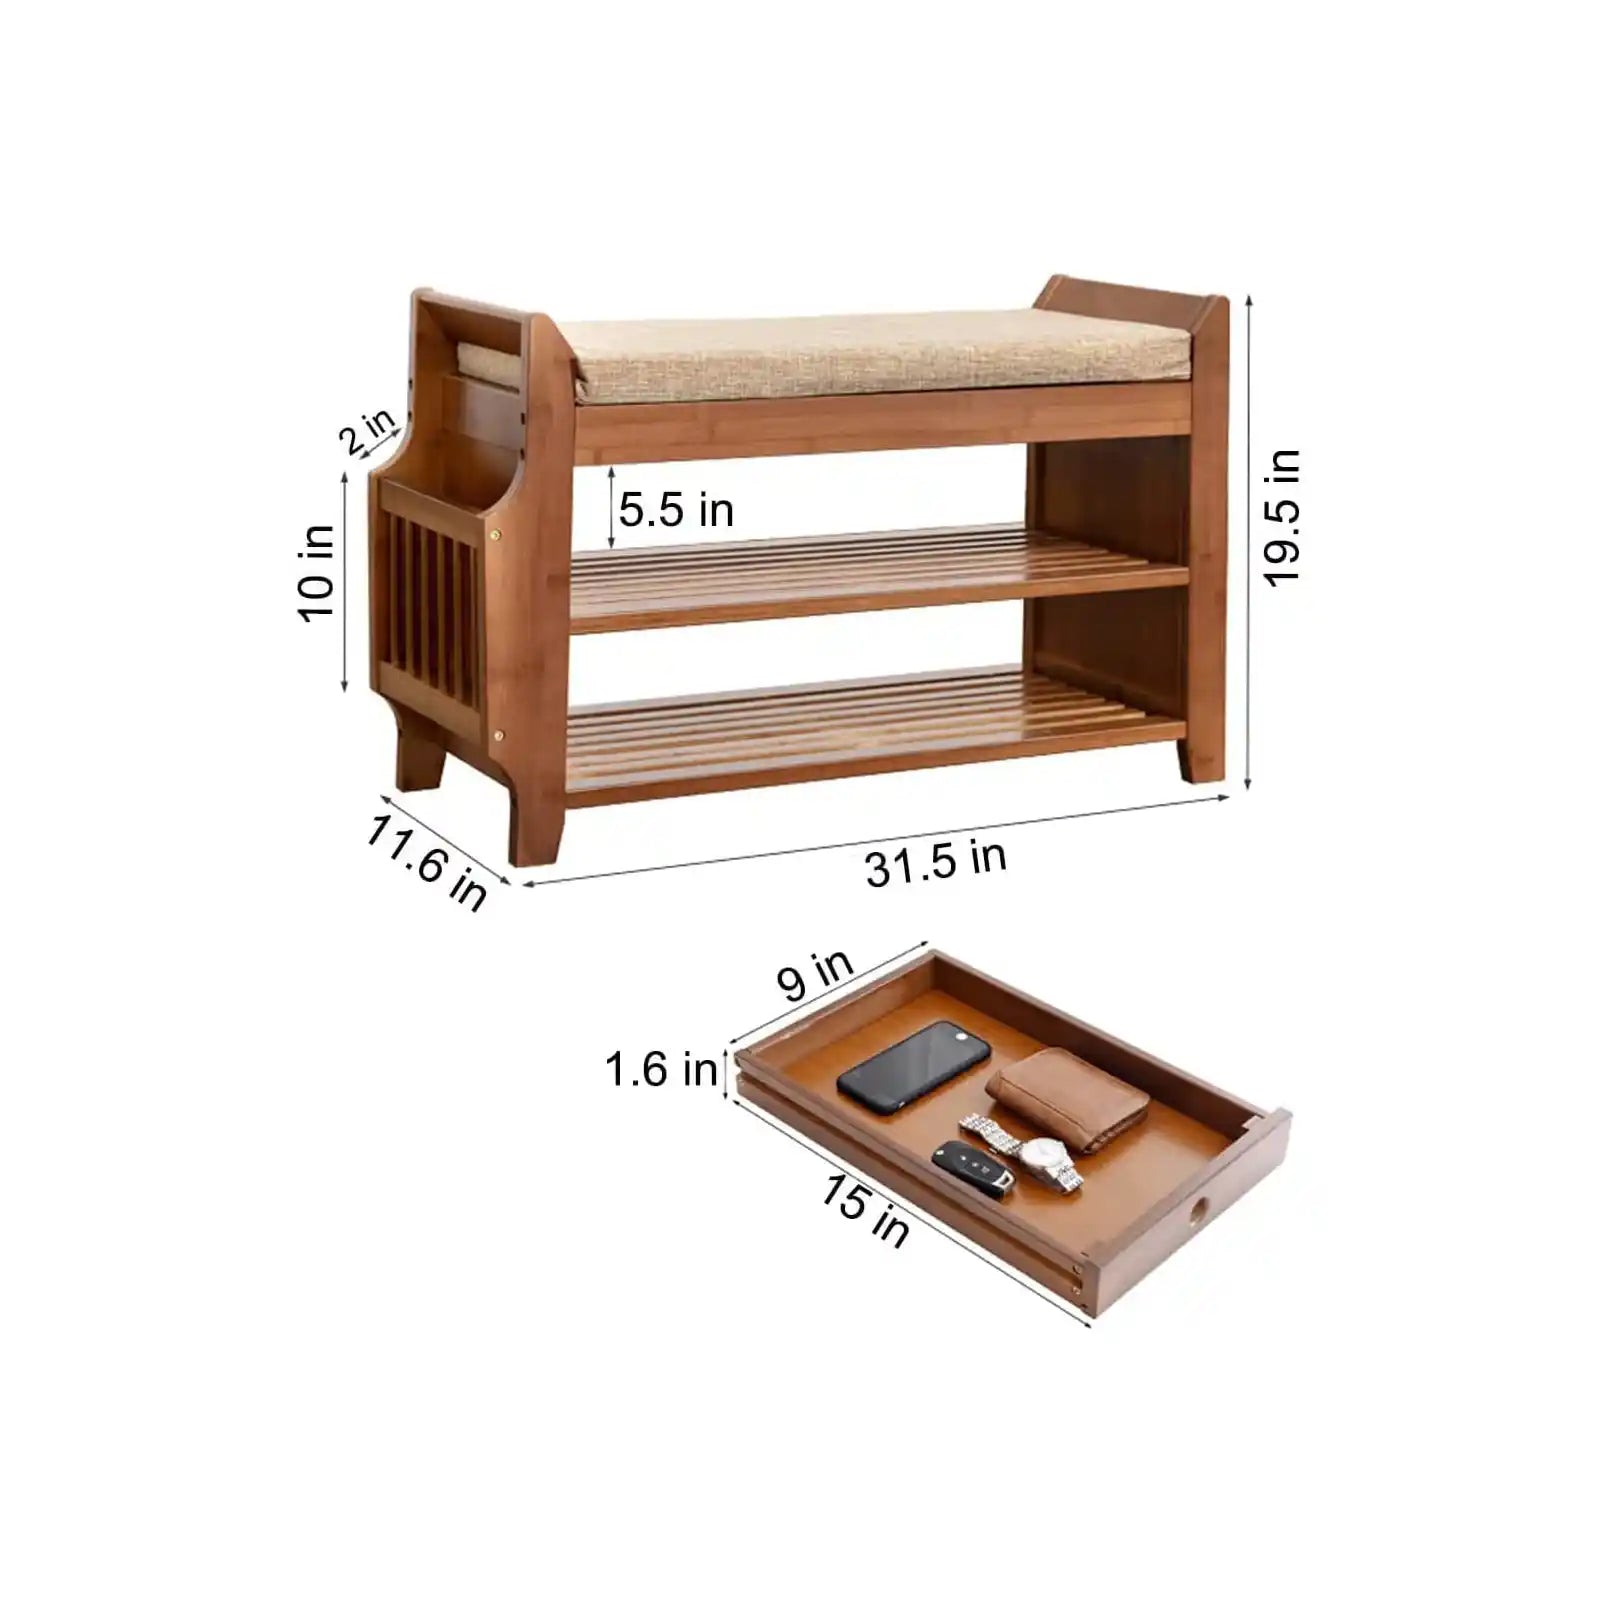 Unique Design Shoe Bench with Hidden Drawer and Side Holder | Premium Quality Bamboo Construction | Easy to Clean | Ample Storage Capacity